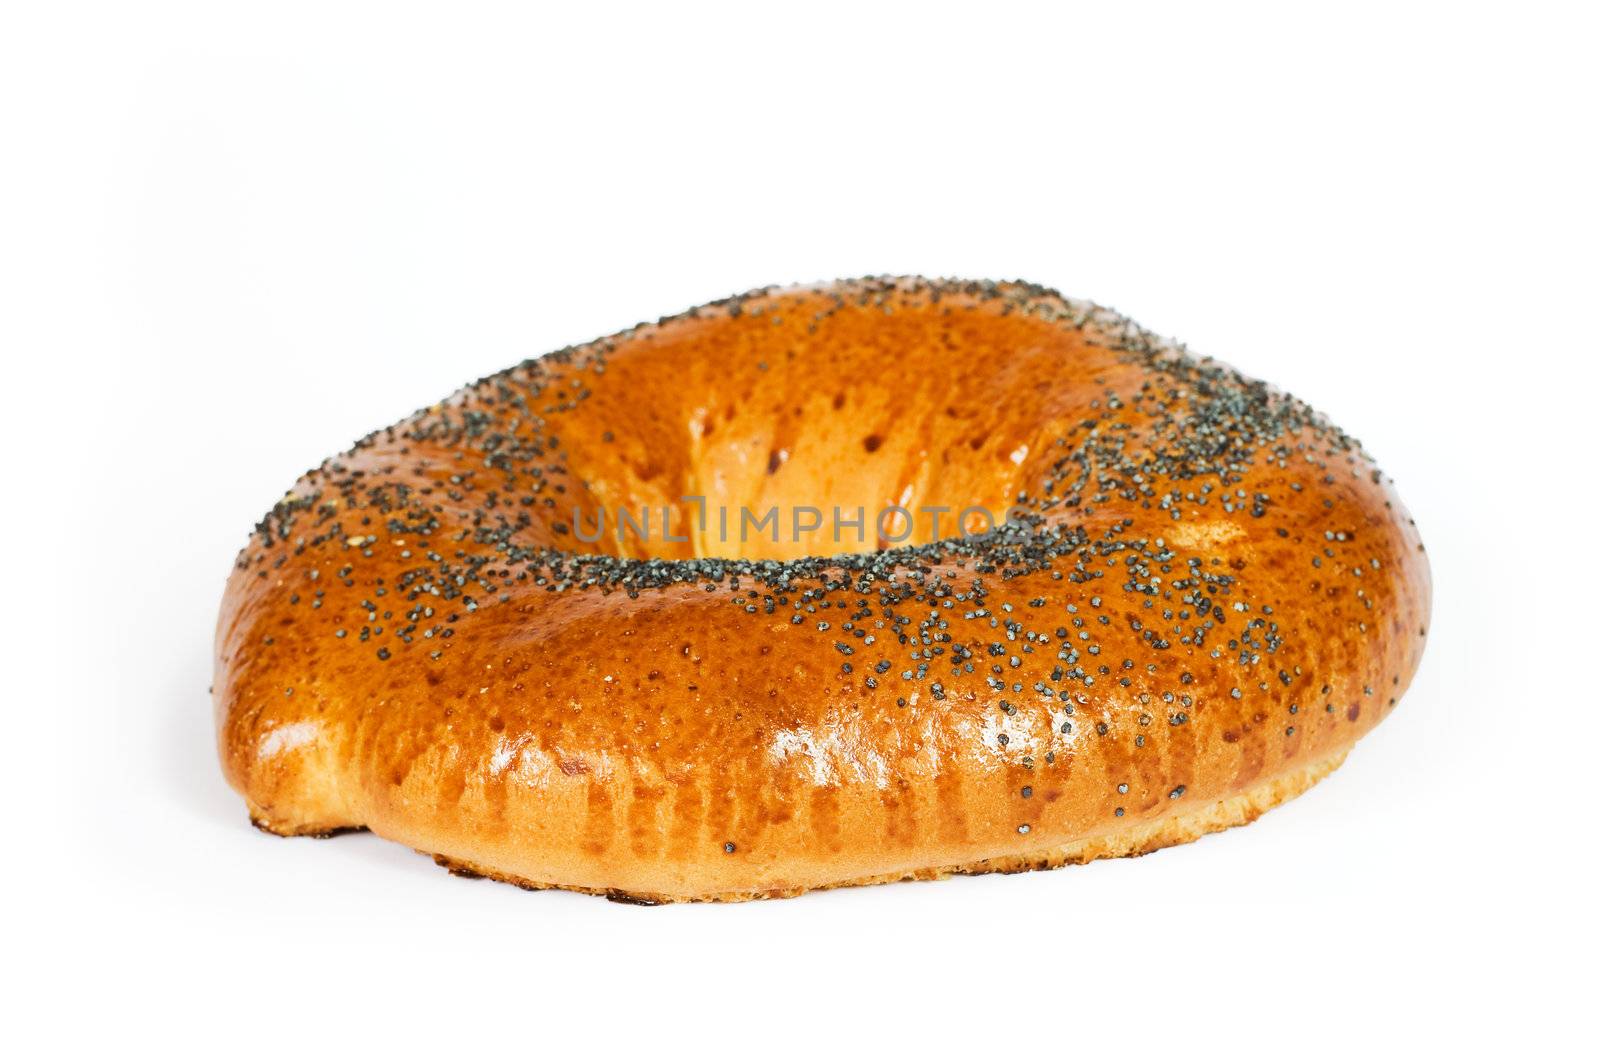 White bread with poppy. Isolated on white background with shadows. Clipping path included to remove object shadow or replace background.